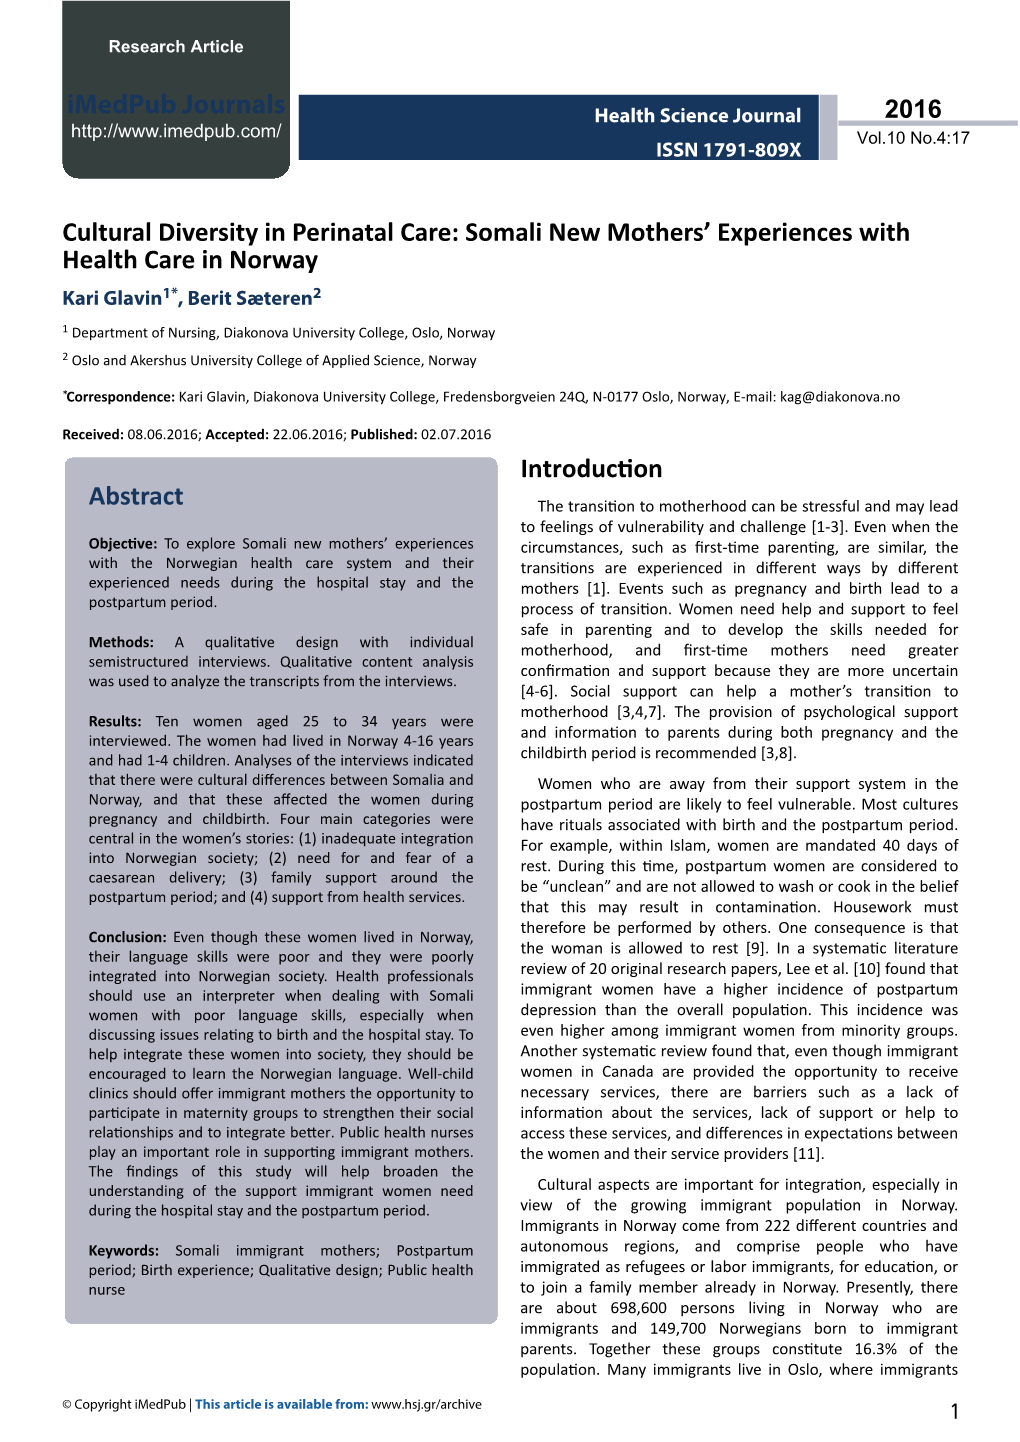 Cultural Diversity in Perinatal Care: Somali New Mothers’ Experiences with Health Care in Norway Kari Glavin1*, Berit Sæteren2